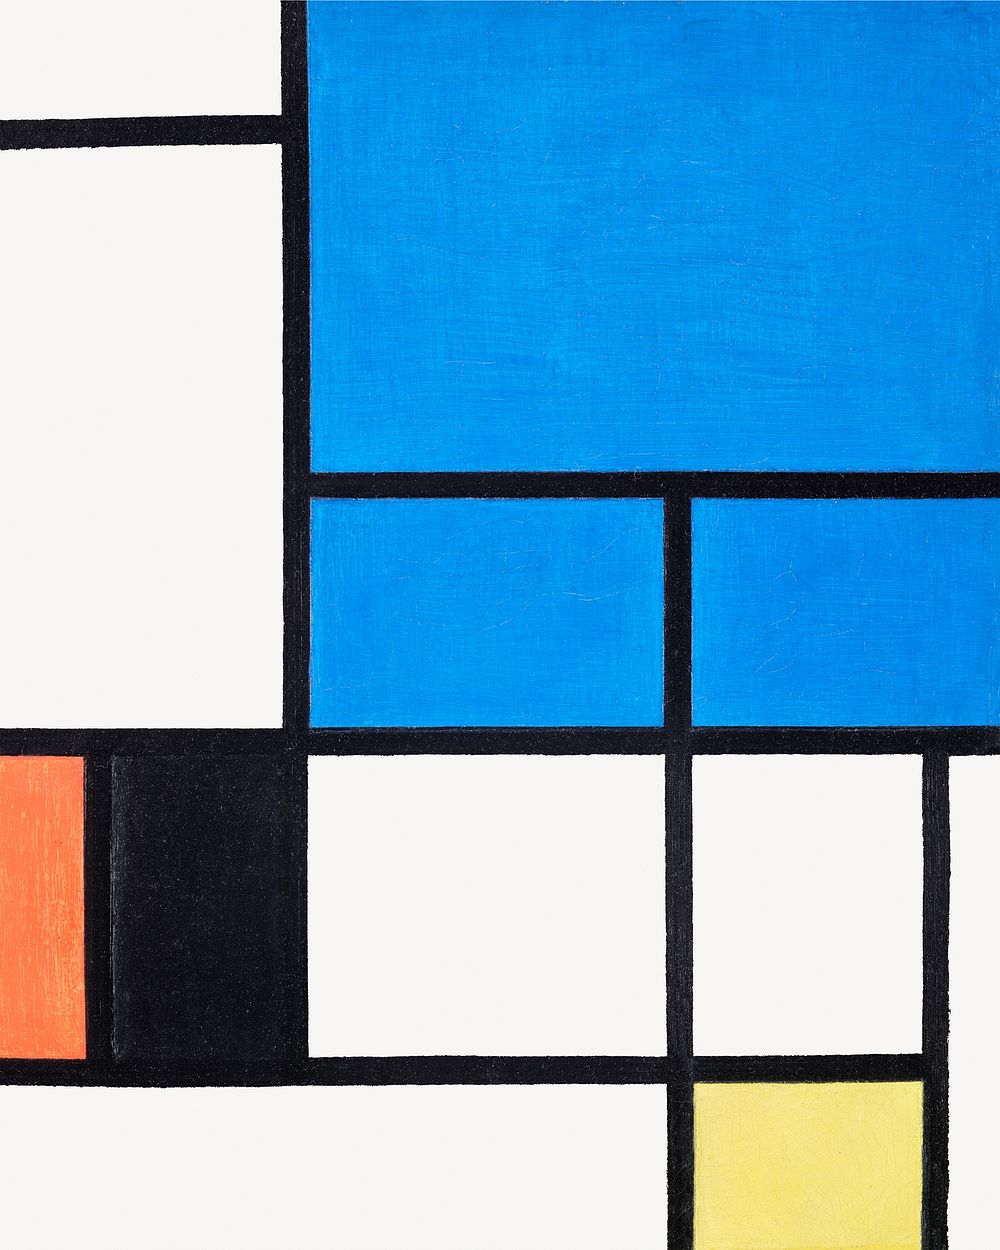 Piet Mondrian&rsquo;s Composition with Large Blue Plane, Cubism art. Remixed by rawpixel.